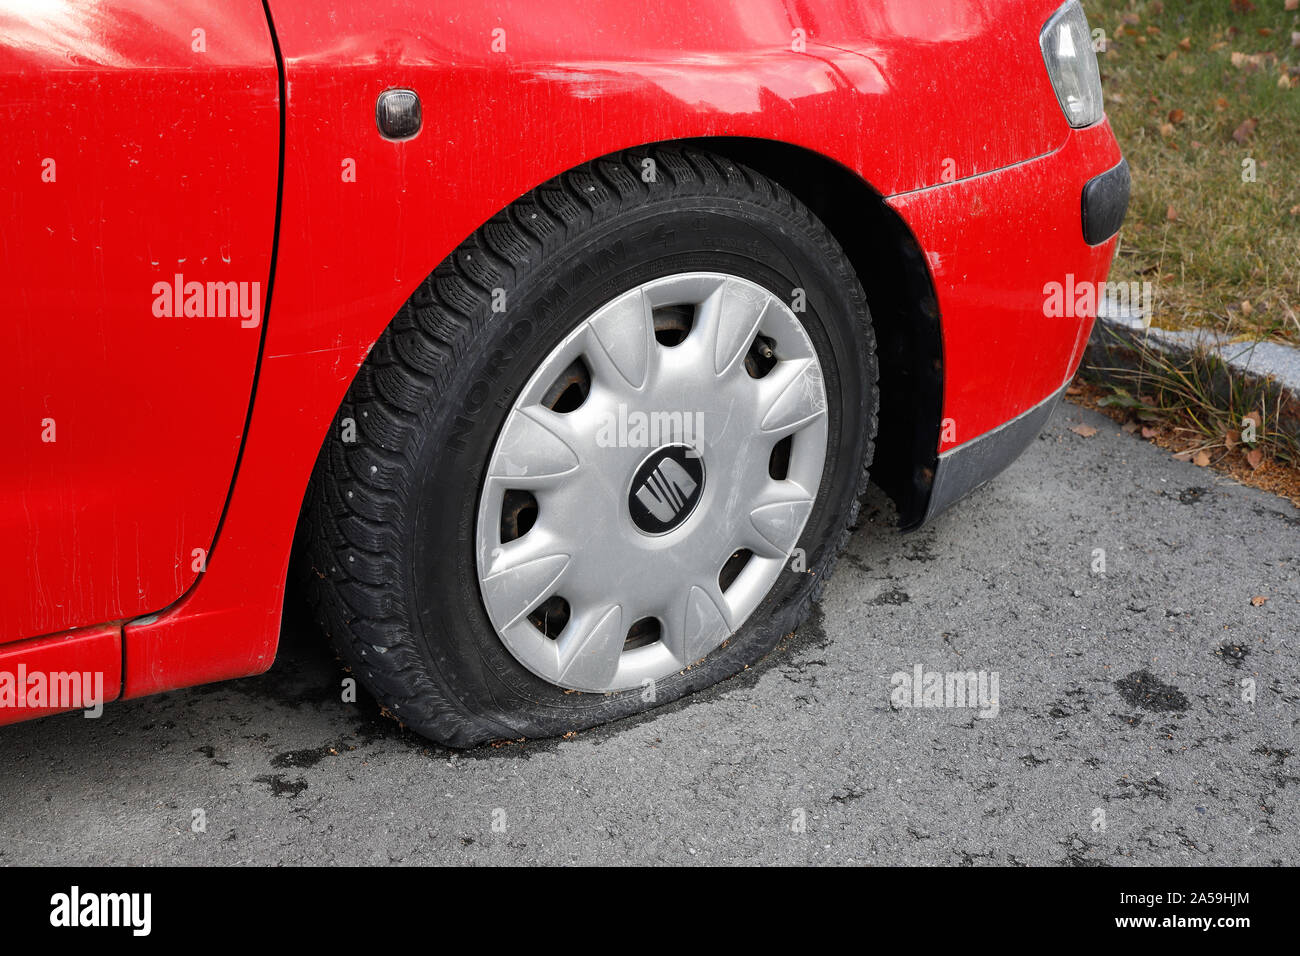 Klabu, Norway - October 10, 2019: View of a flat front wheel on red Seat car. Stock Photo